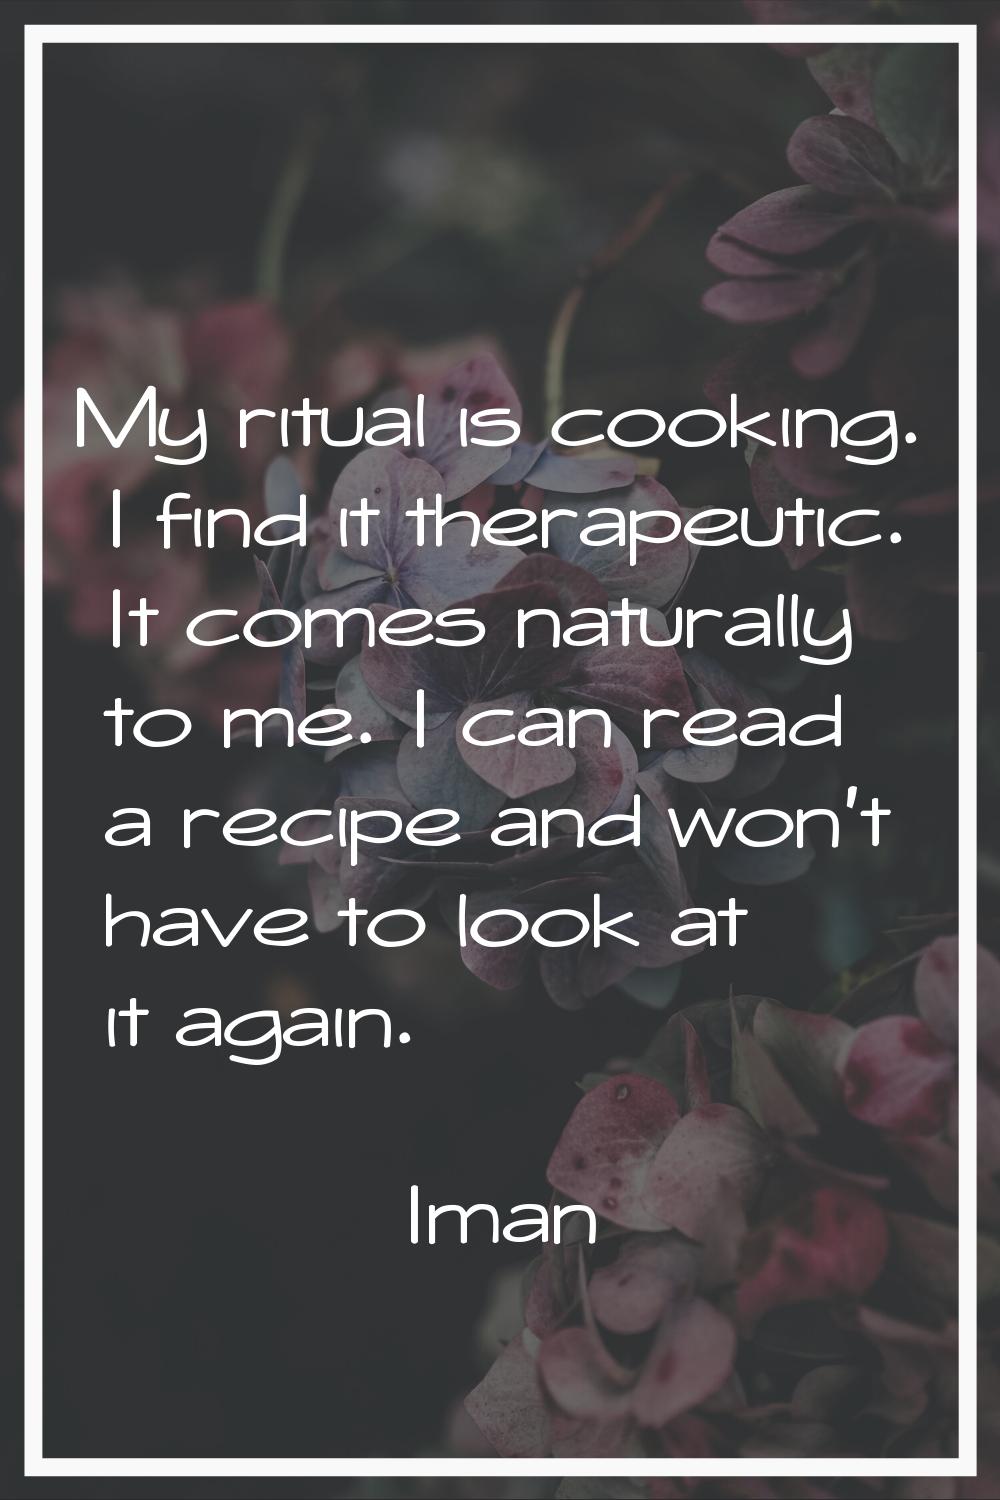 My ritual is cooking. I find it therapeutic. It comes naturally to me. I can read a recipe and won'